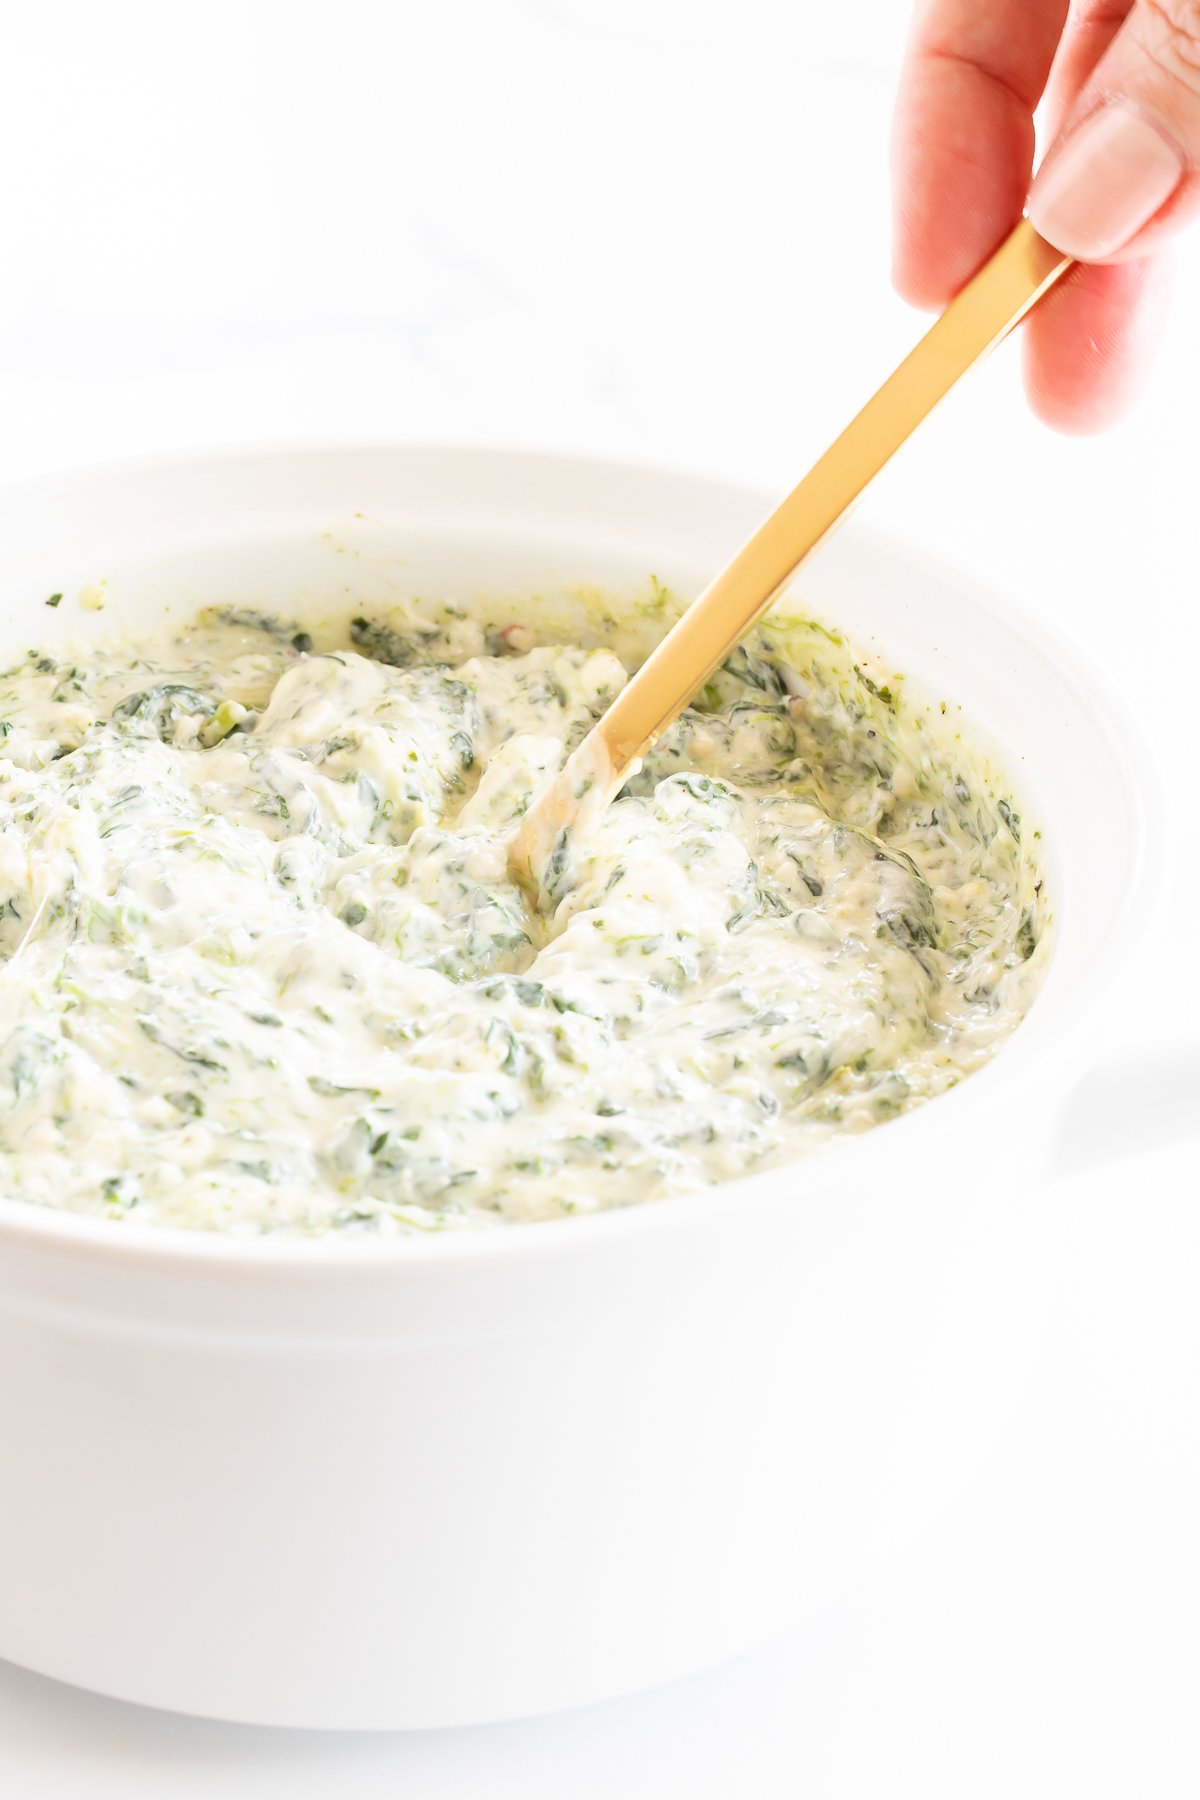 A person is dipping a spoon into a bowl of cream cheese spinach dip.